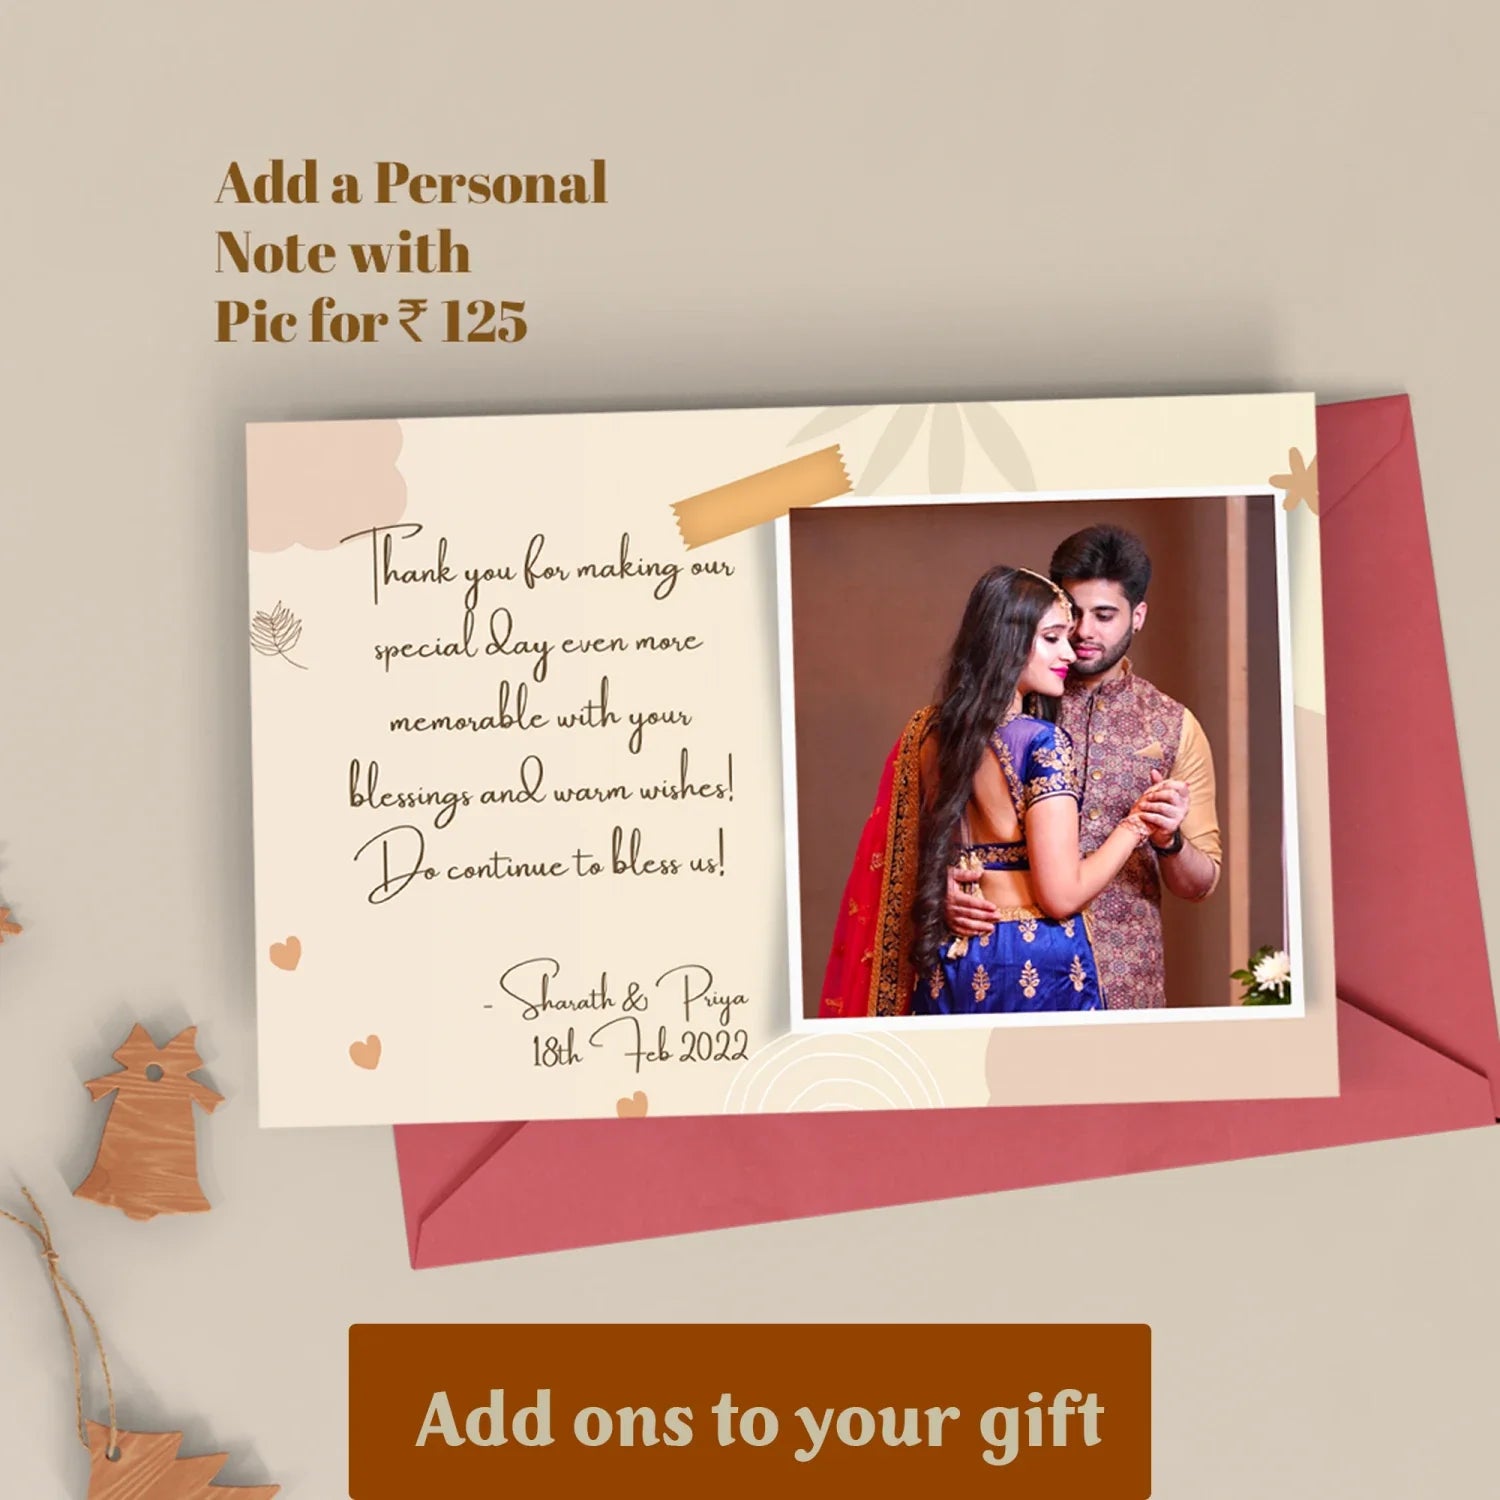 Add your personal note and polaroid picture to customise the gifts and give it a personal touch and make every occasion special and heartfelt. 